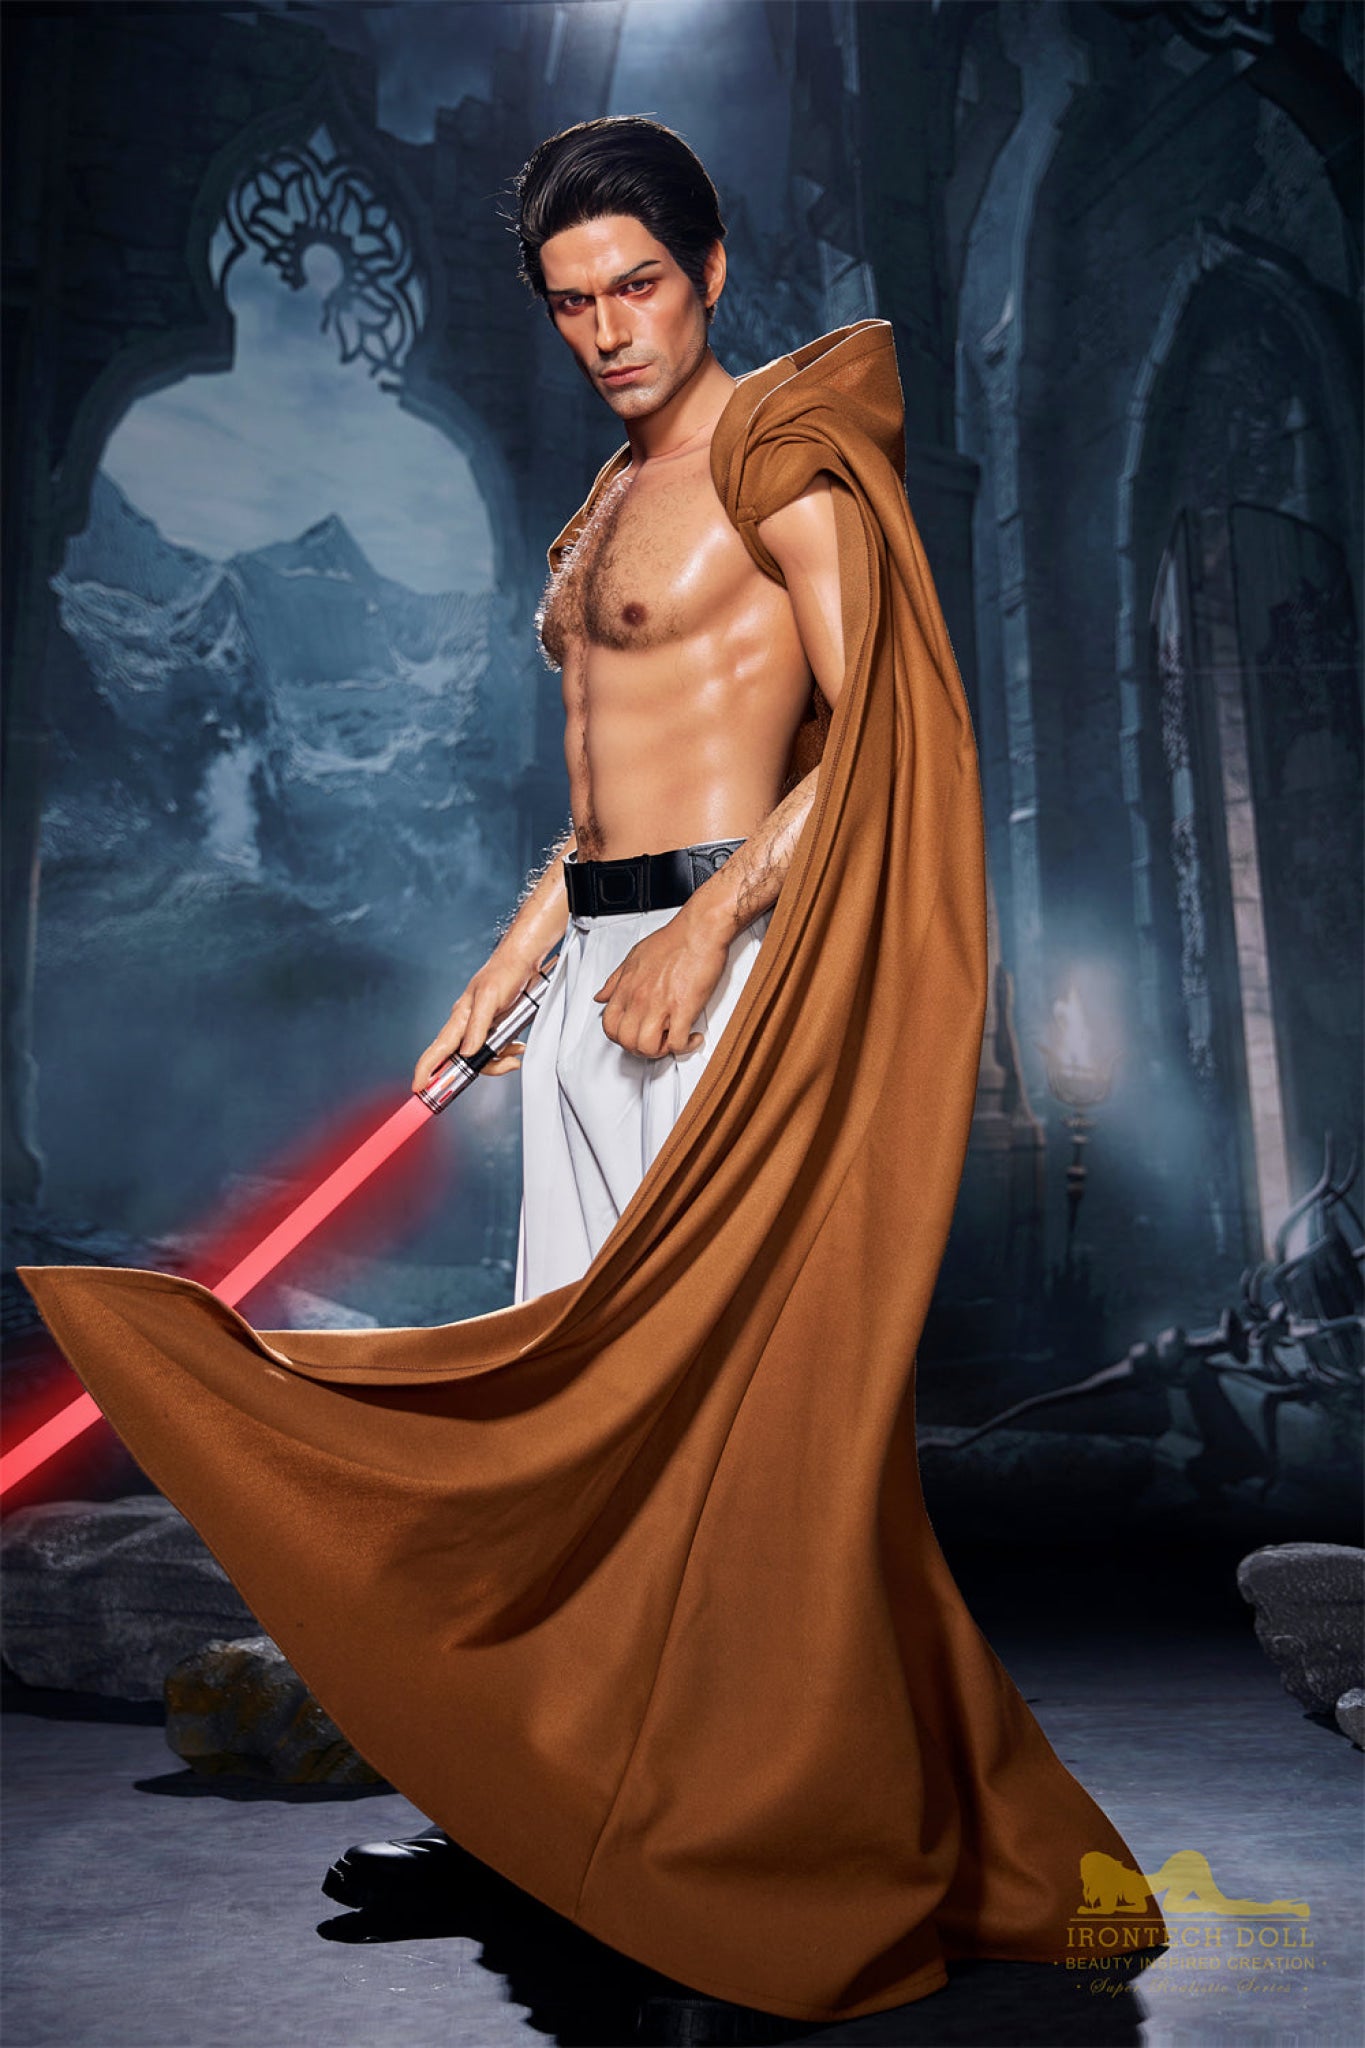 Thomas Jedi Silicone Male Sex Doll - IronTech Doll® Irontech Doll®